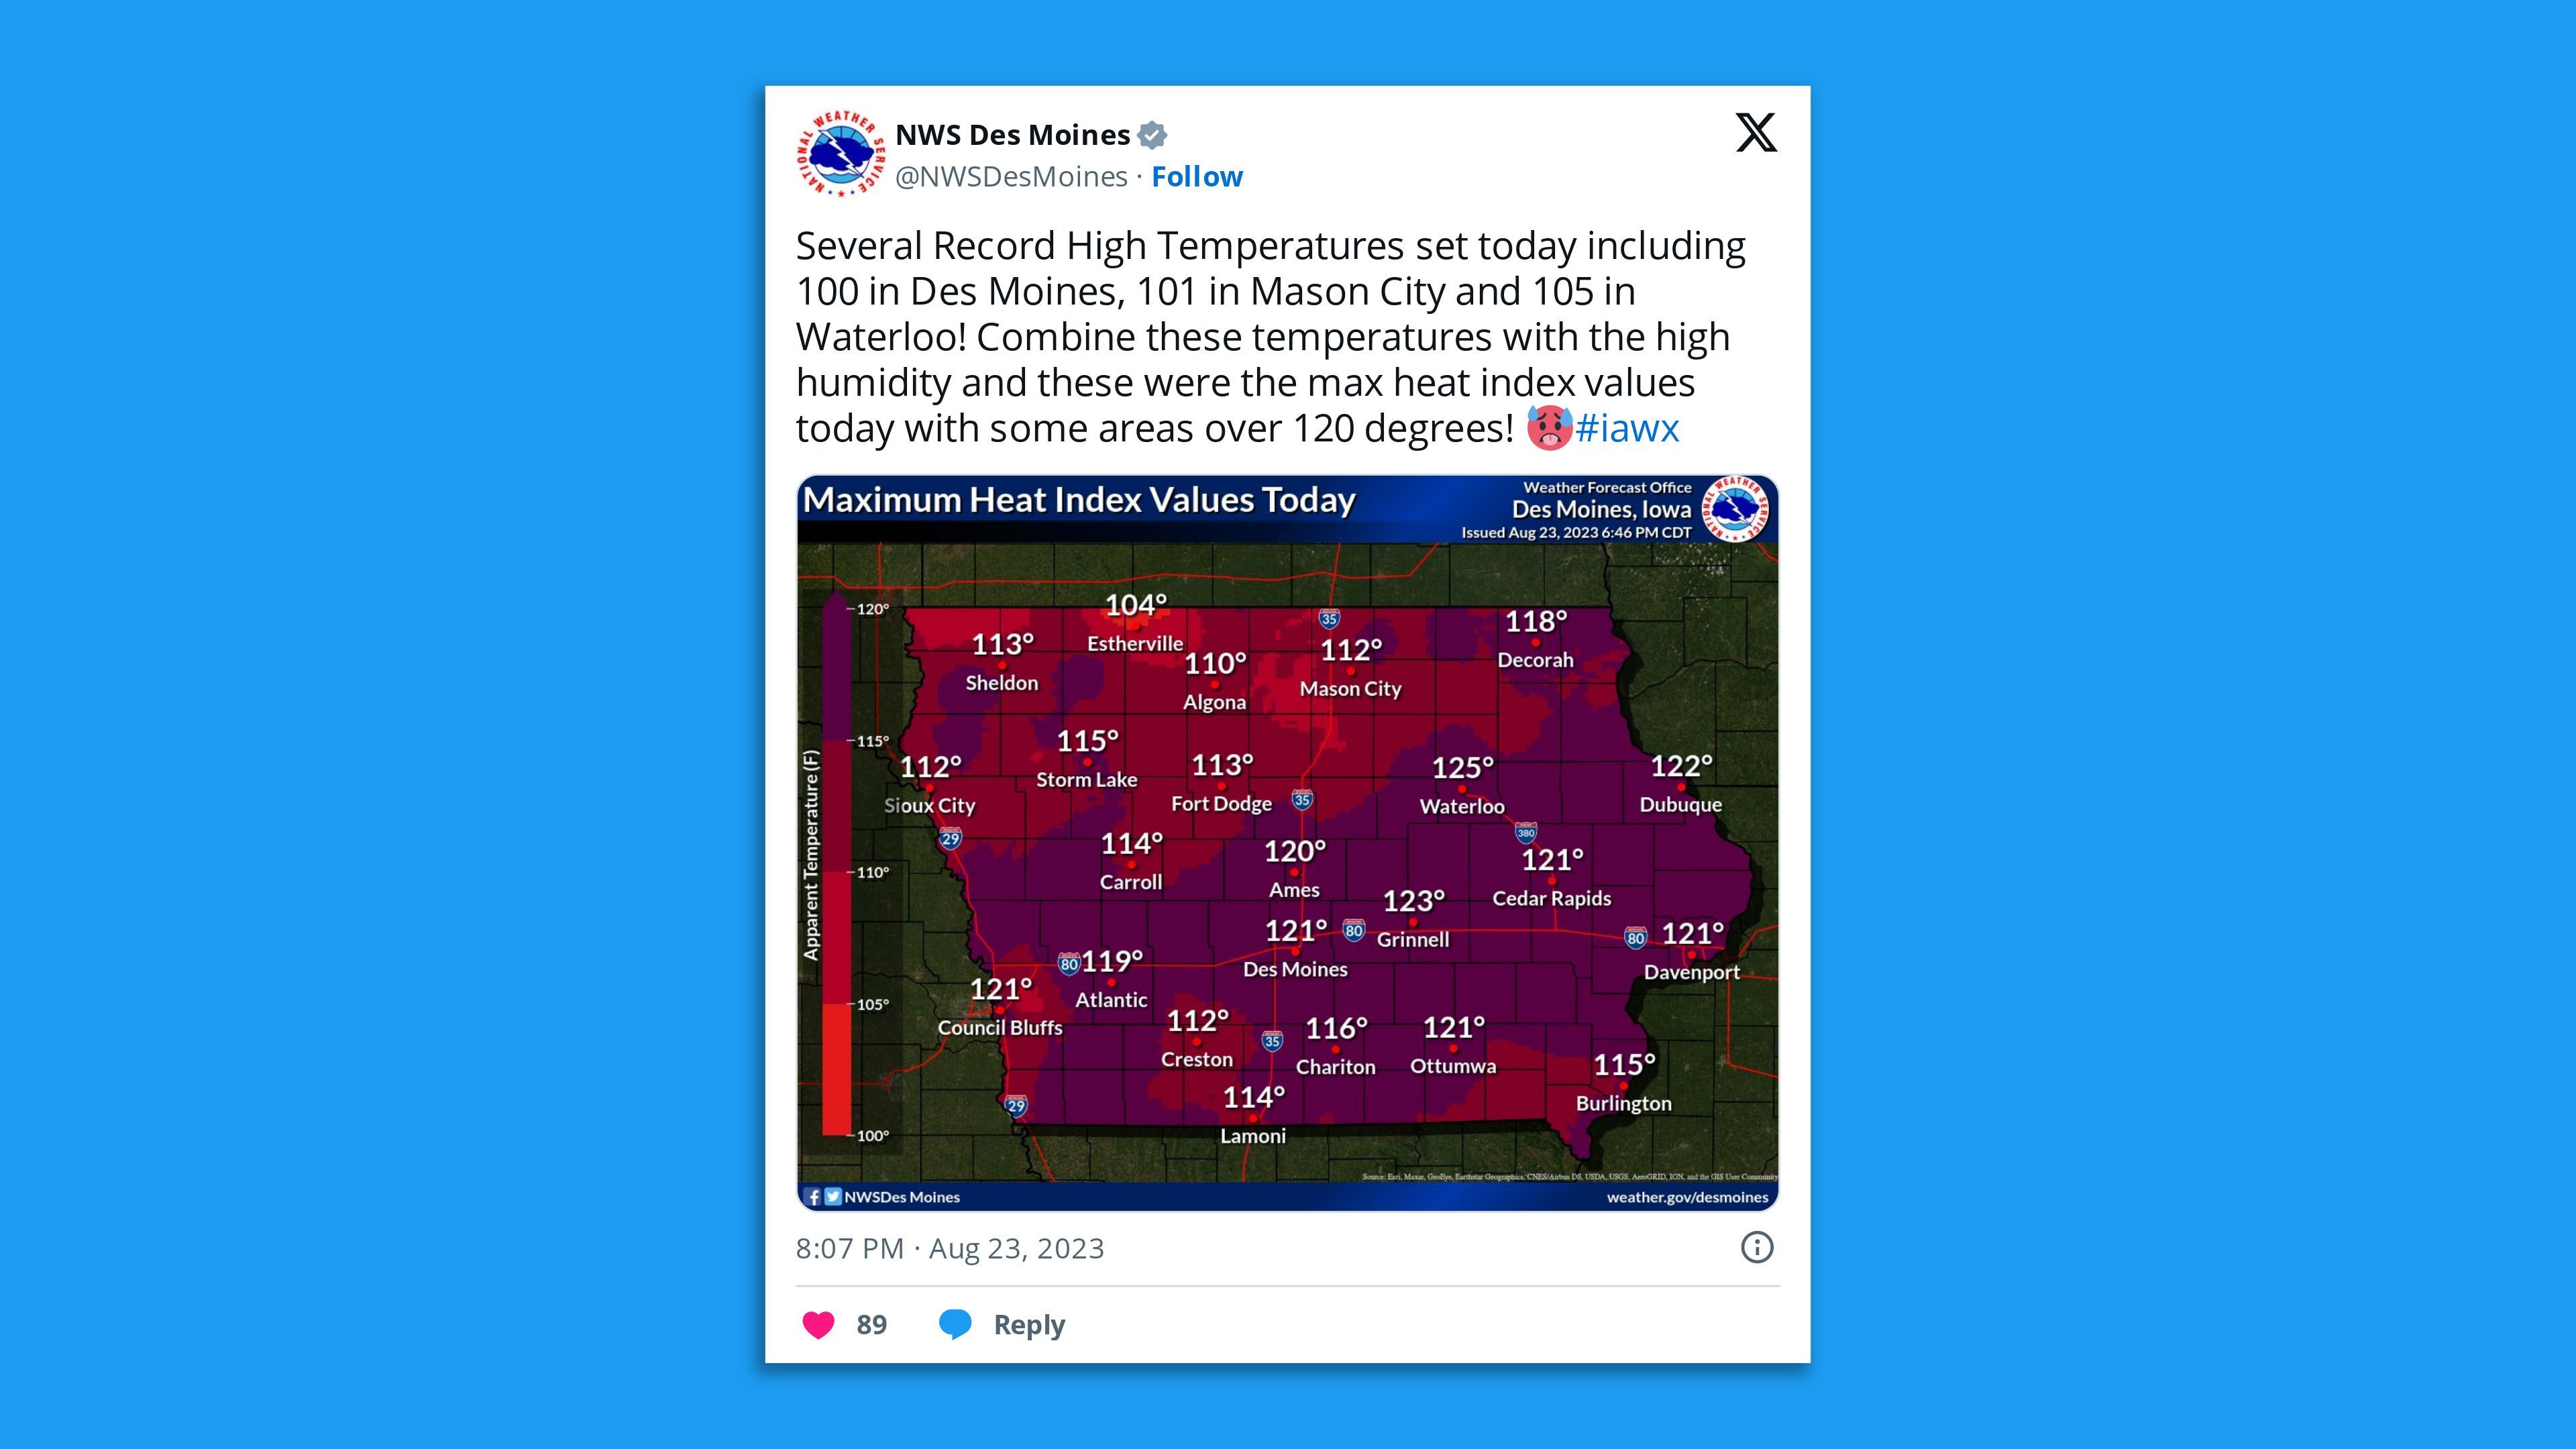 A screenshot of an NWS Des Moines tweet, saying: "Several Record High Temperatures set today including 100 in Des Moines, 101 in Mason City and 105 in Waterloo! Combine these temperatures with the high humidity and these were the max heat index values today with some areas over 120 degrees!"